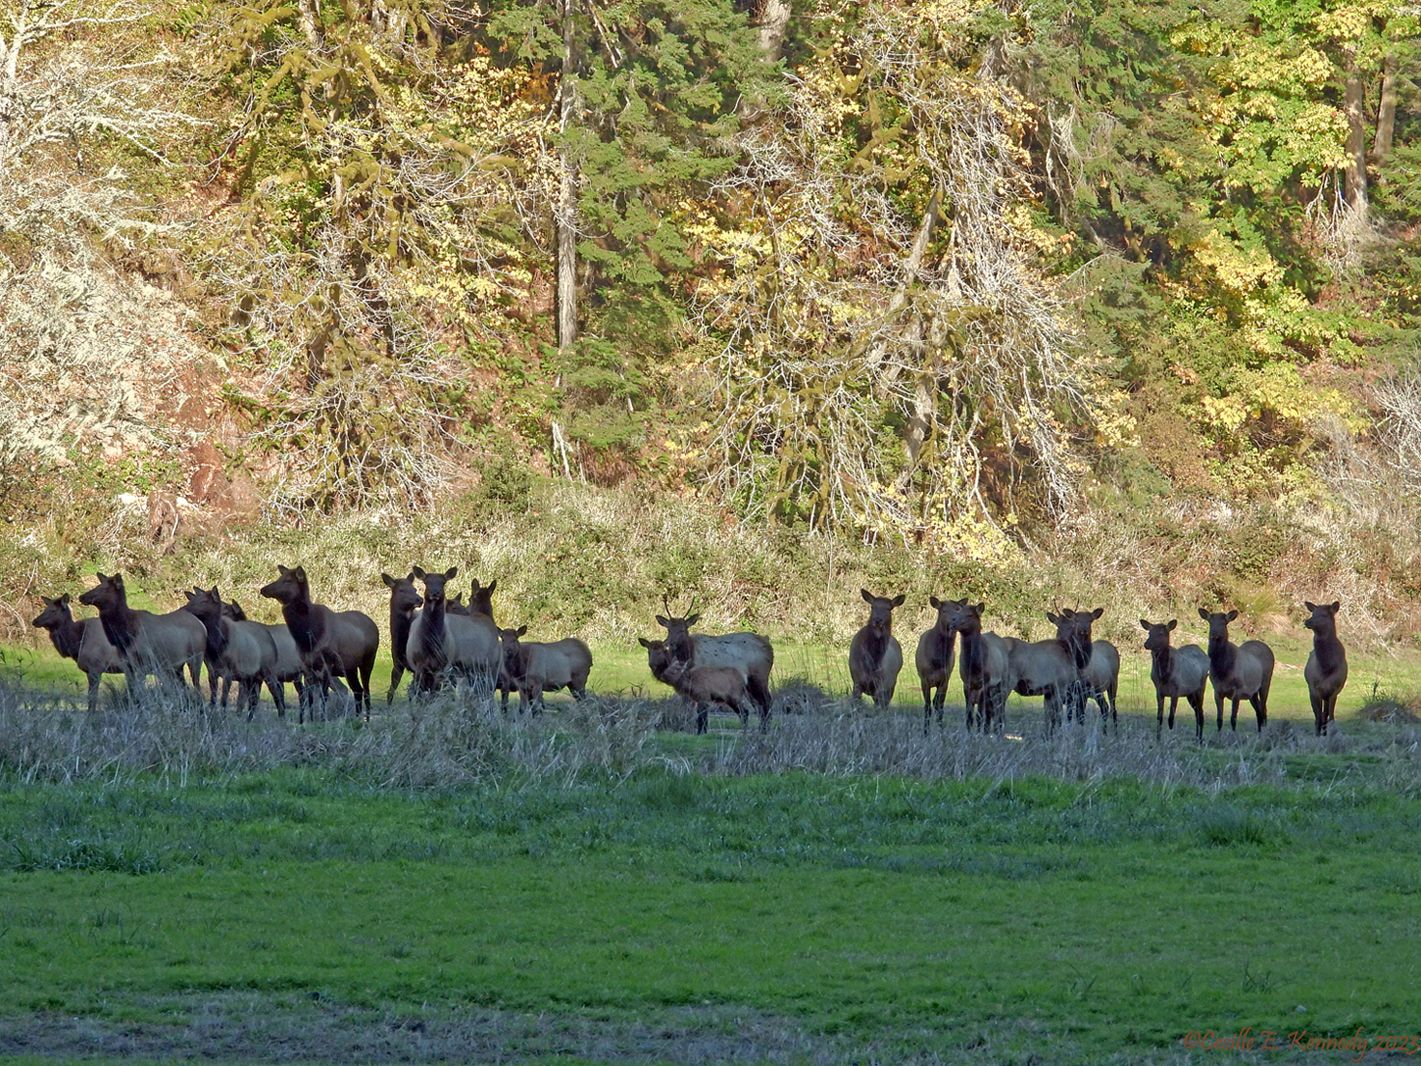 Community photo by Cecille Kennedy | Alsea, Oregon